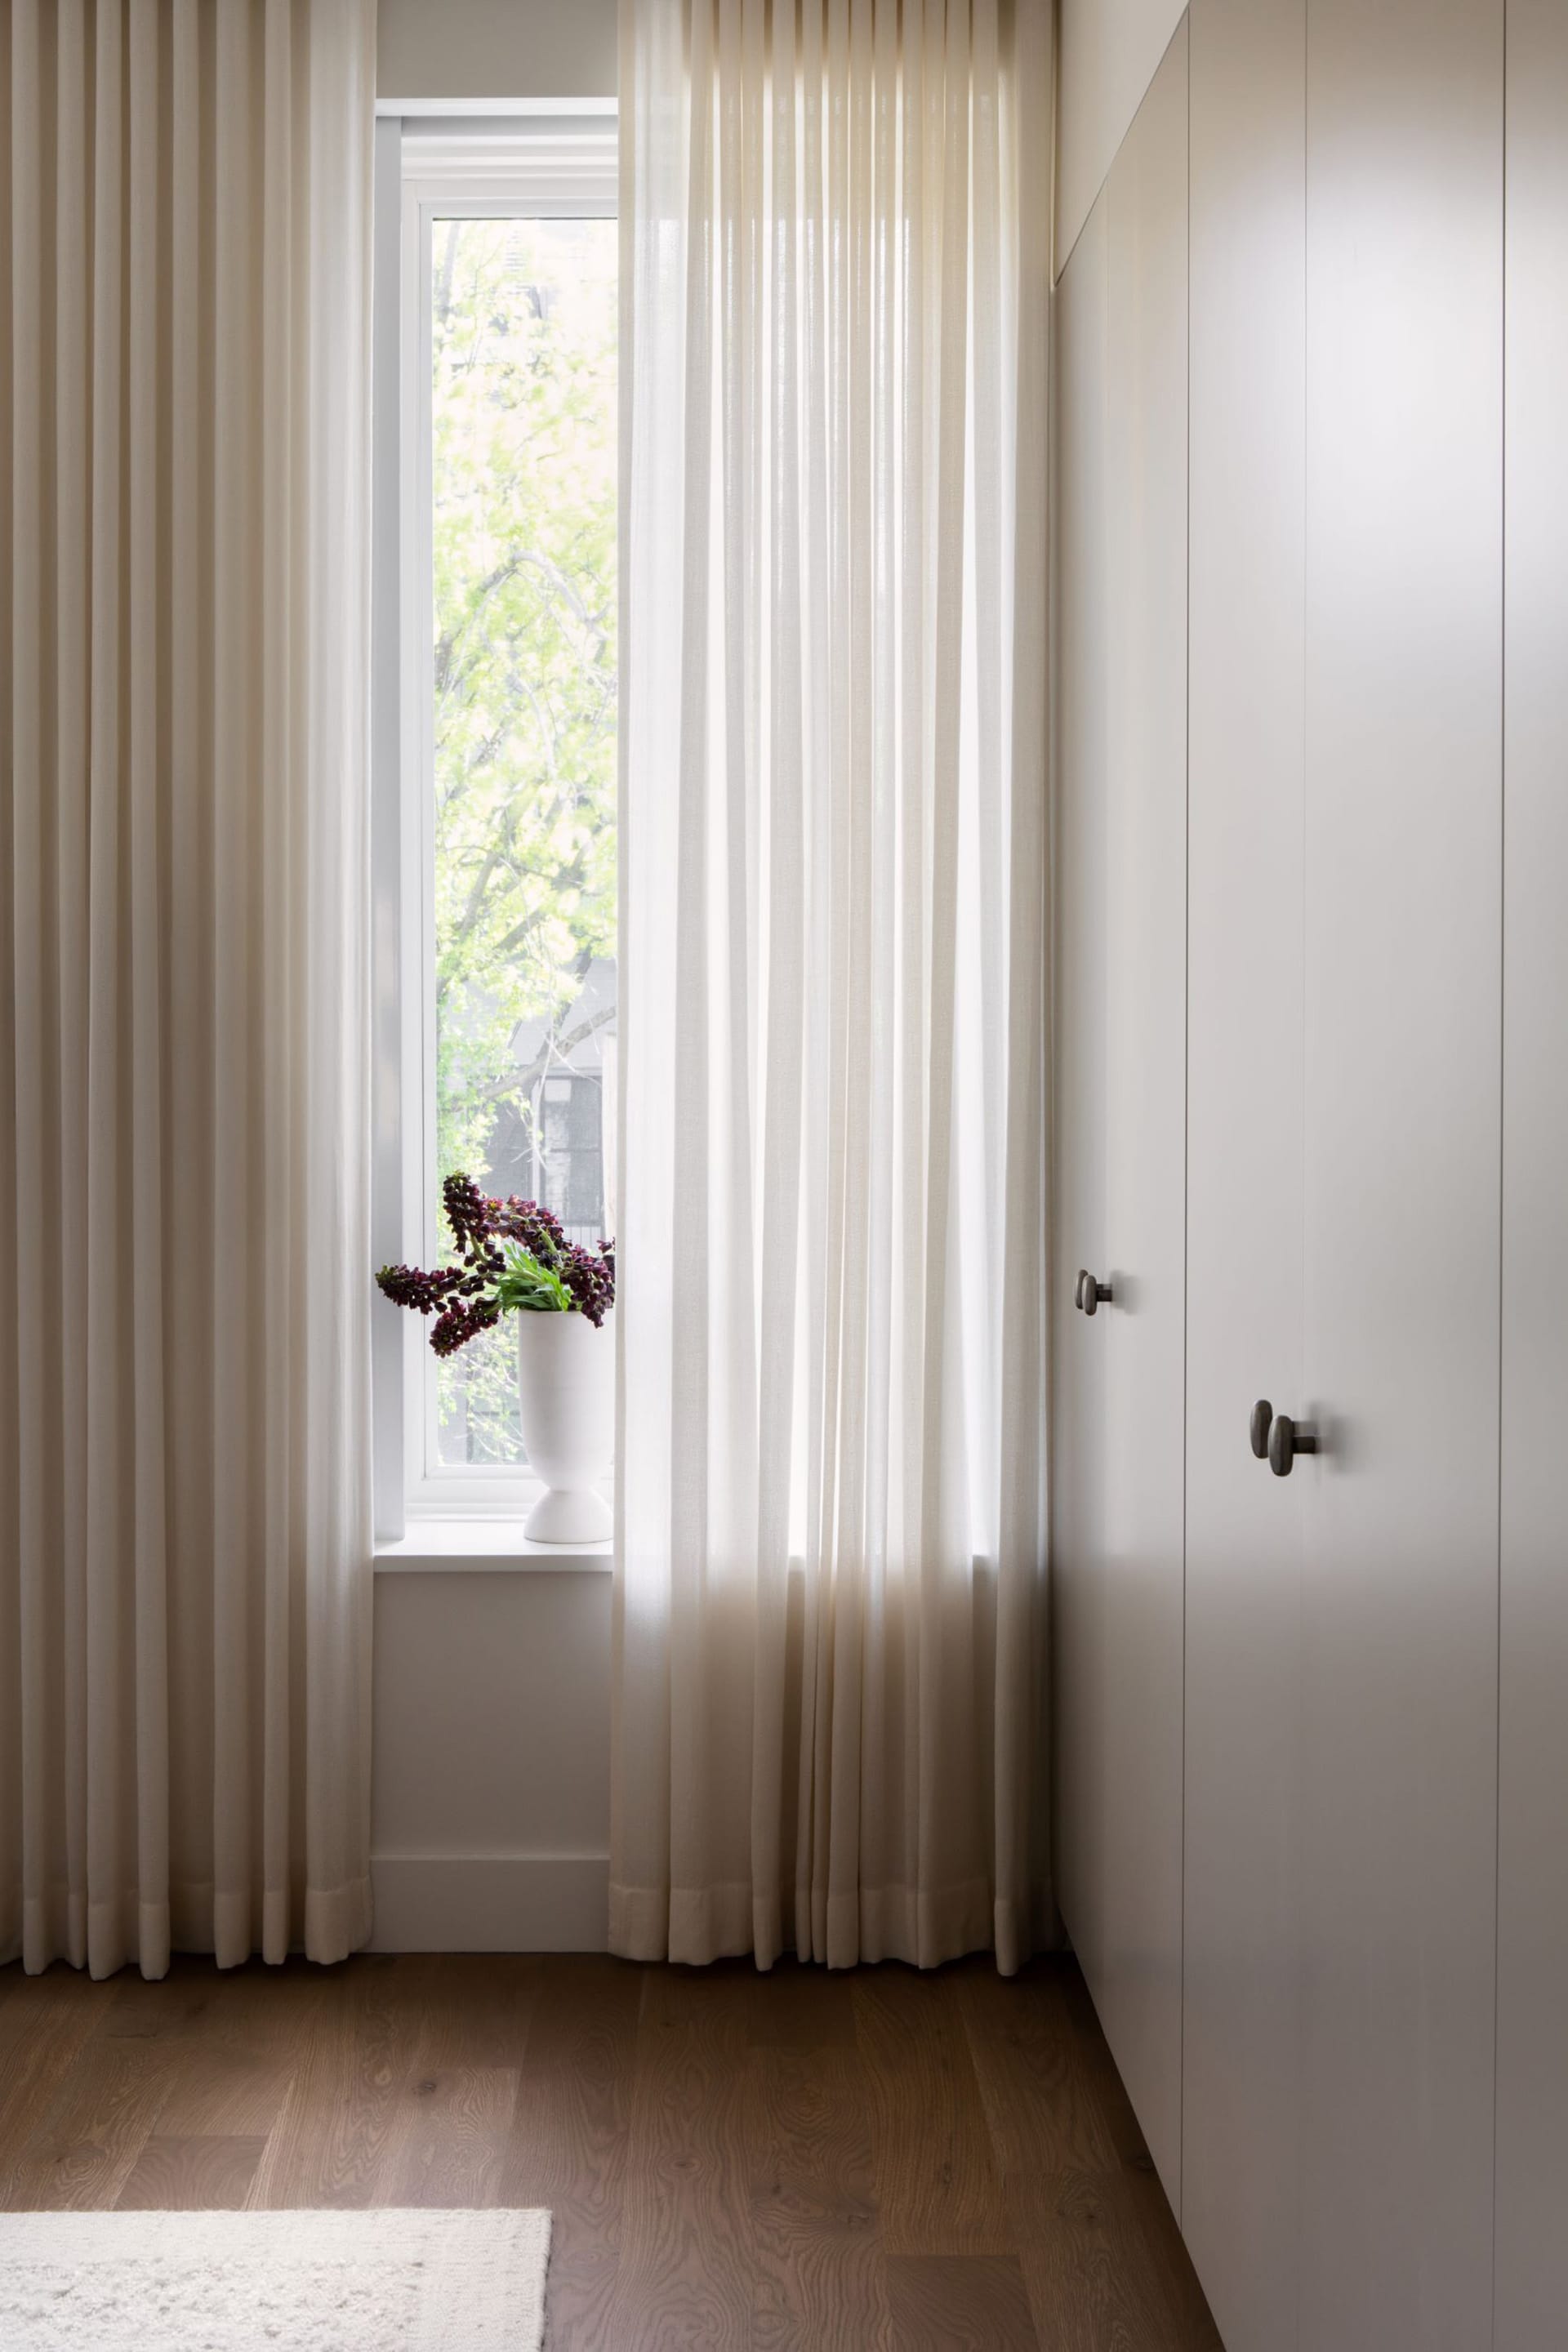 Custom closet doors next to a window with floor-to-ceiling curtains and a vase of flowers on the windowsill.